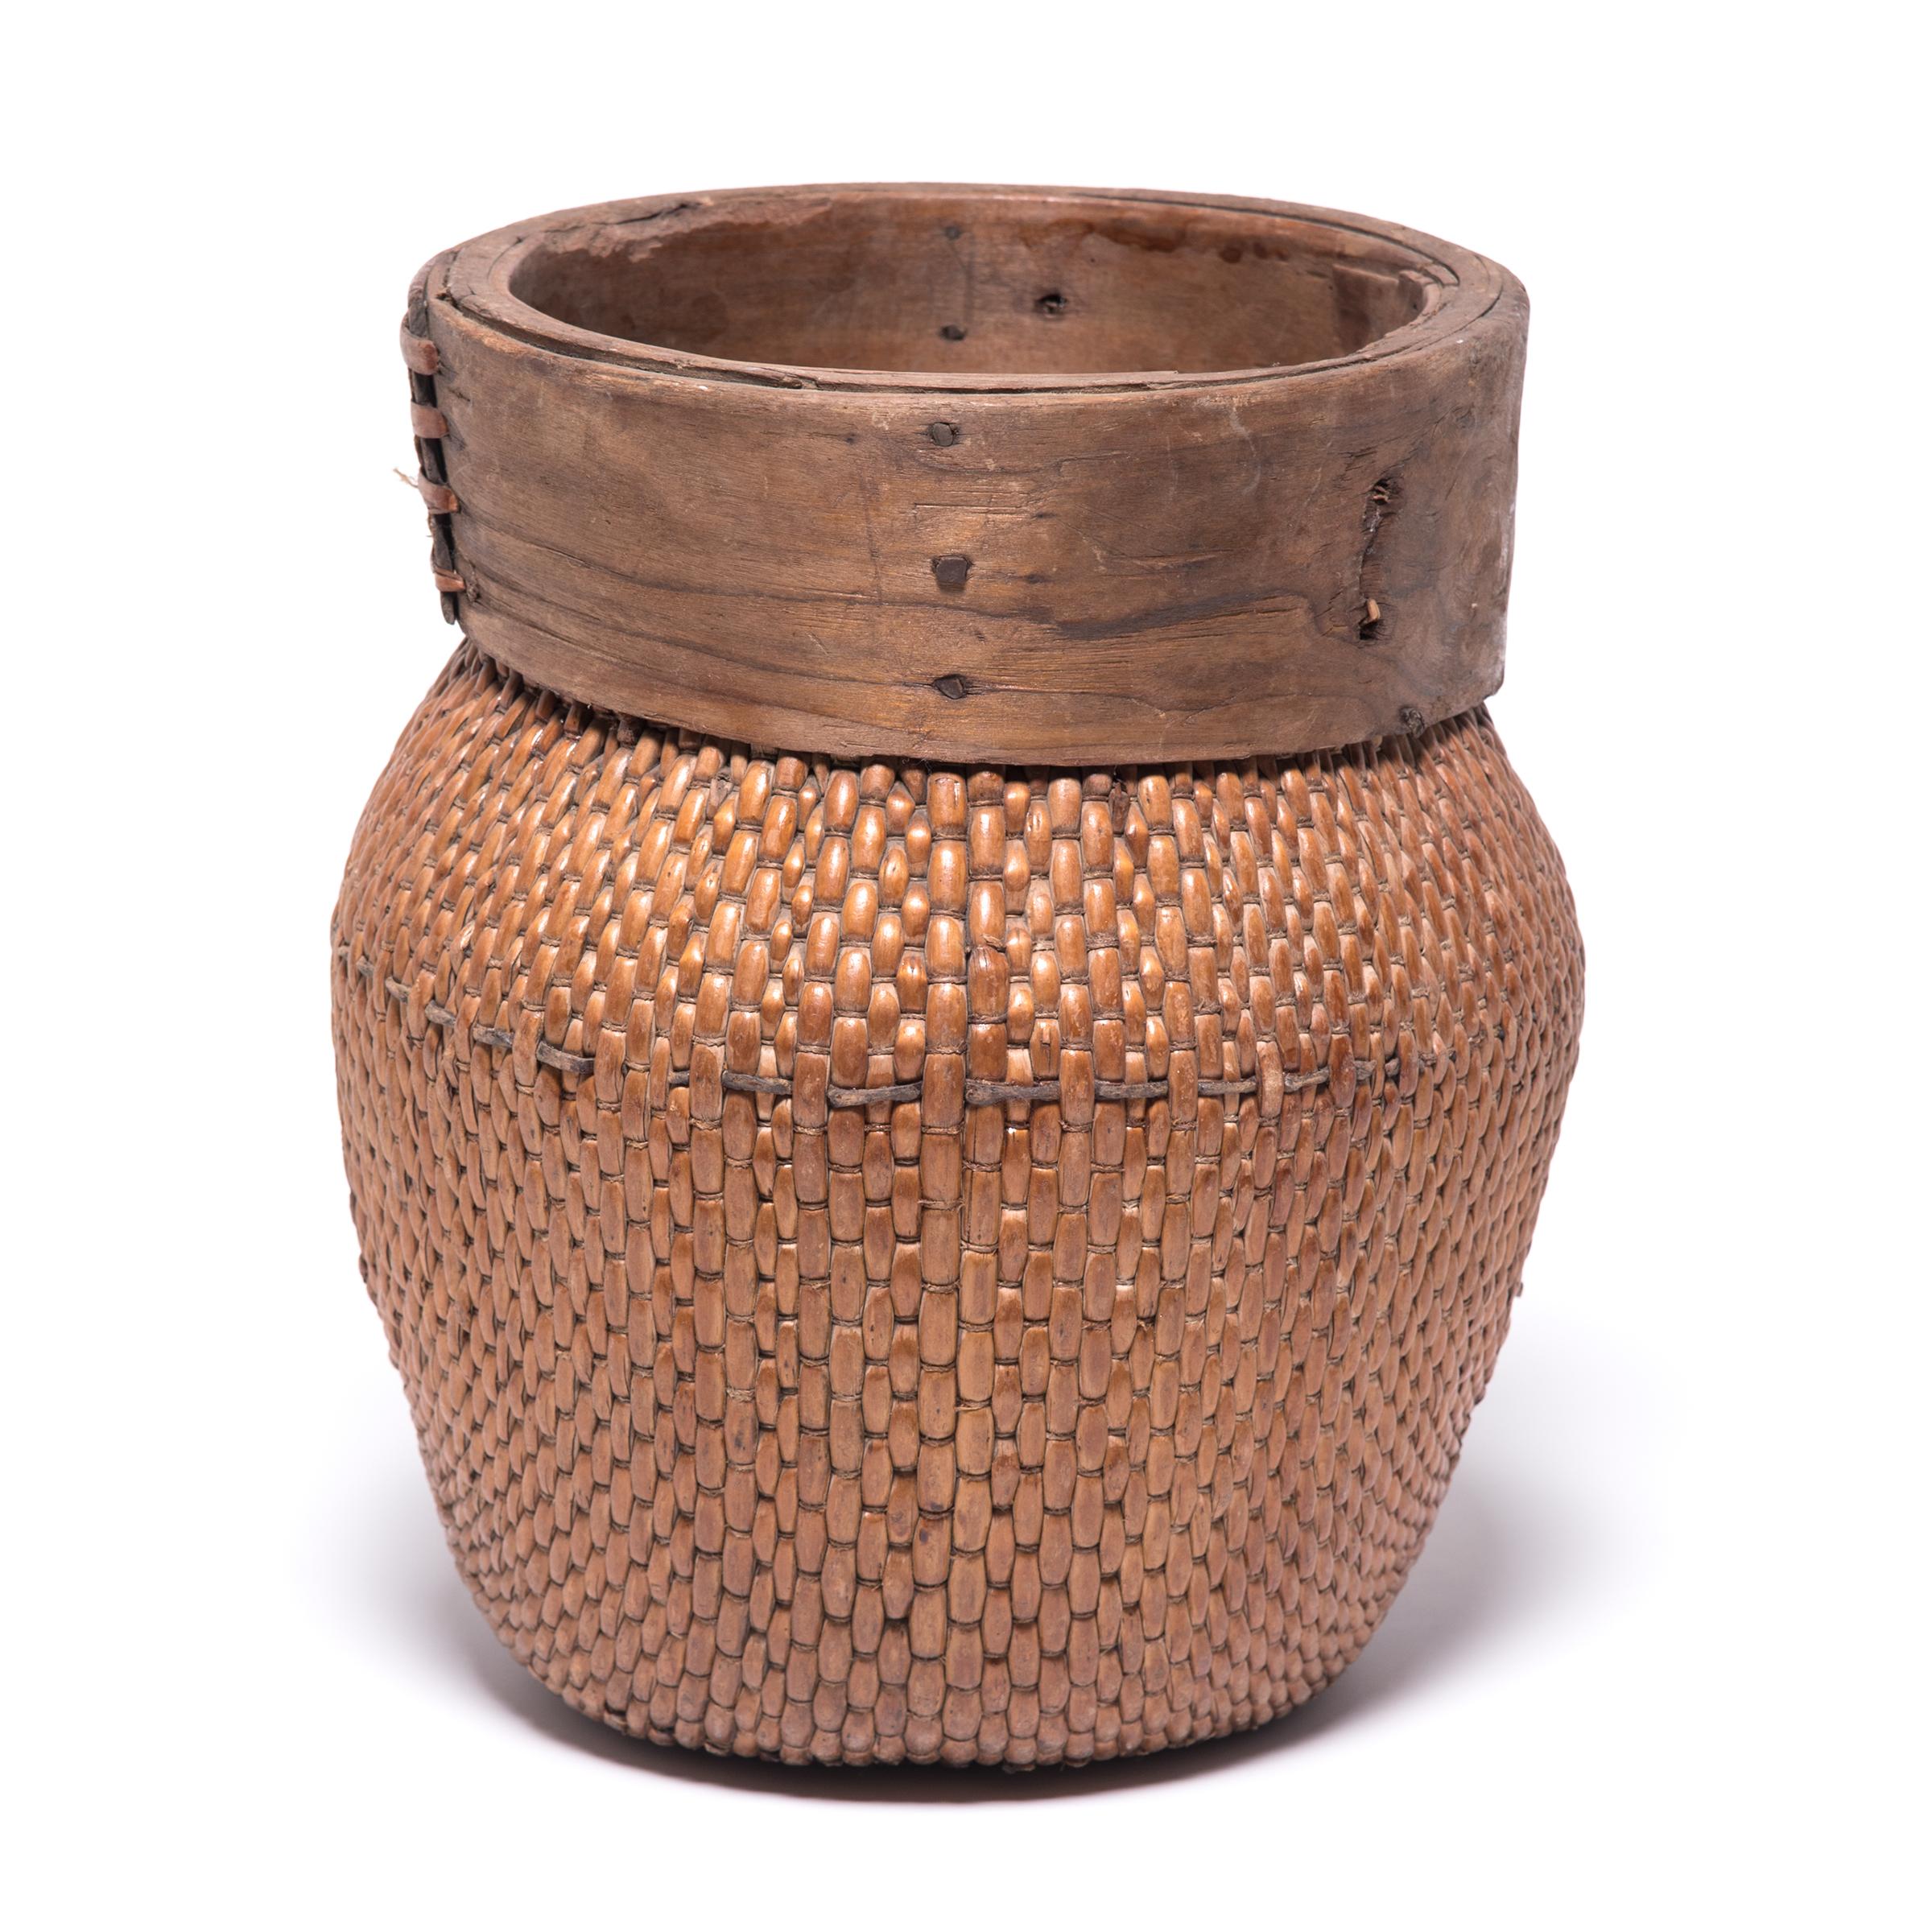 Centuries ago, a reed fisherman’s basket like this one would have been fairly common in rural China: an everyday item that would have been used until it was worn through. This particular example remains in beautiful condition, and so a century